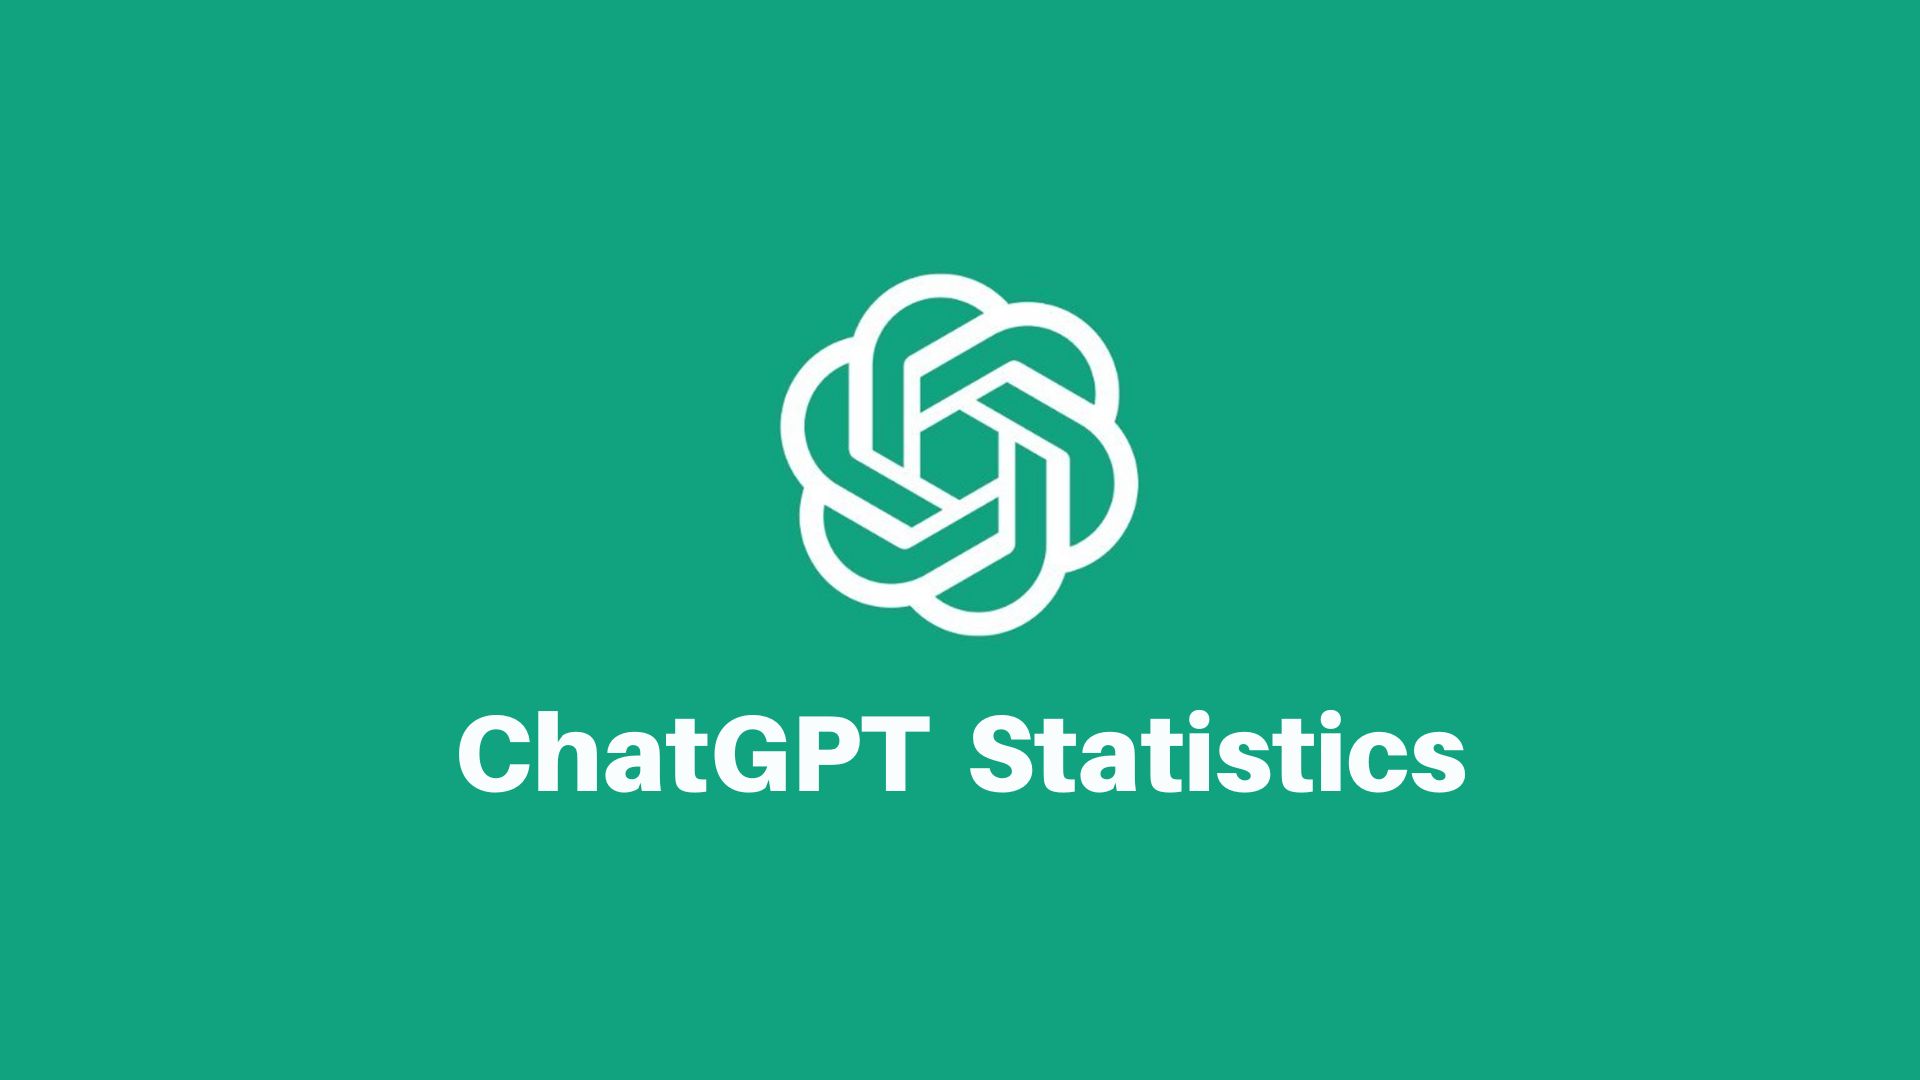 ChatGPT Statistics By Users, Revenue and Funding